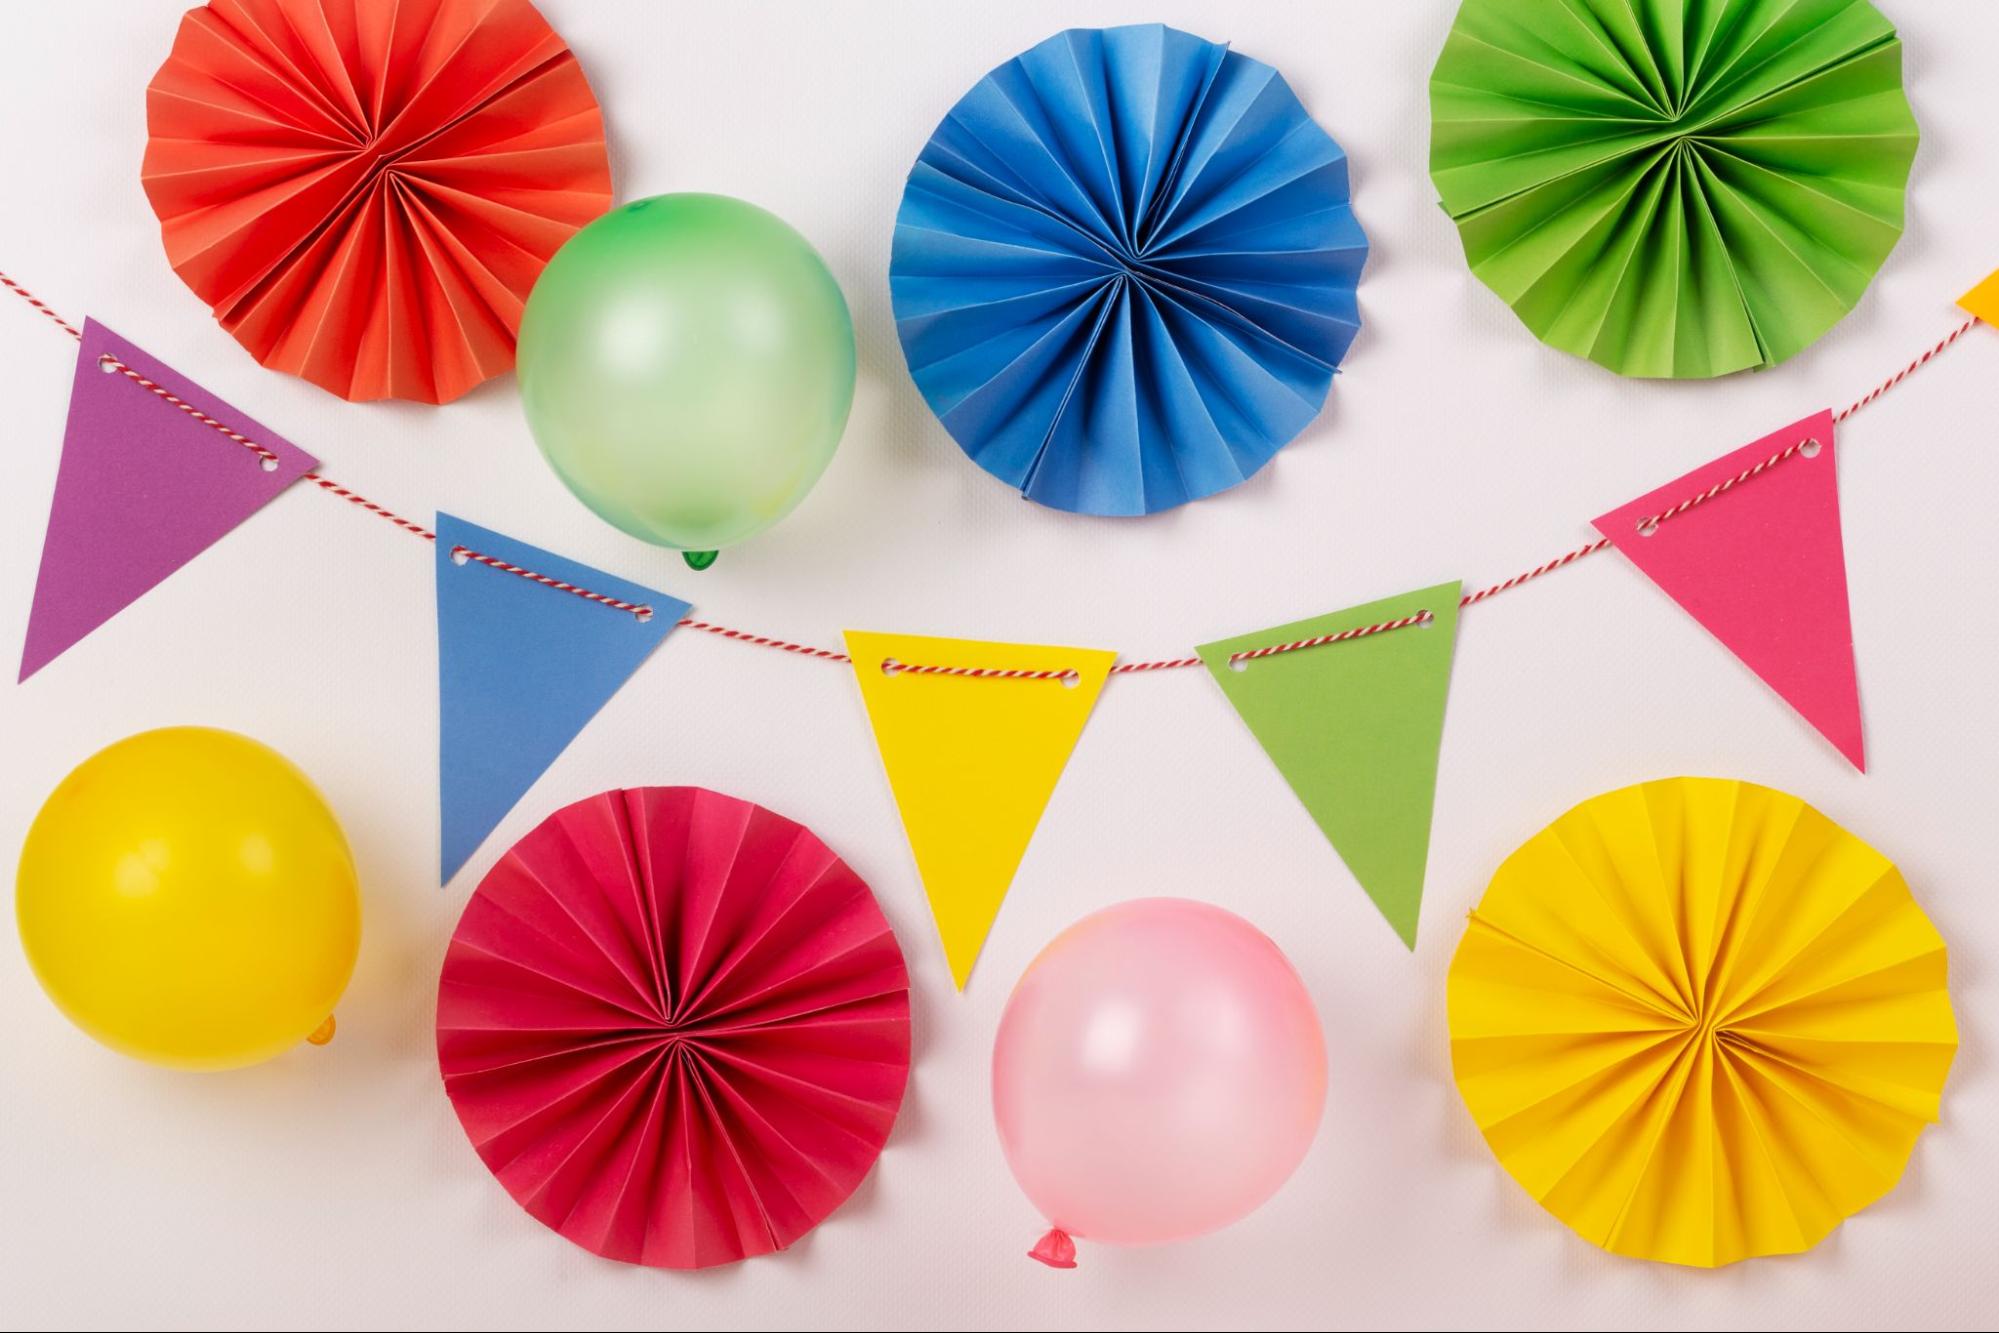 Hanging Paper Garlands: Festive home birthday decorations